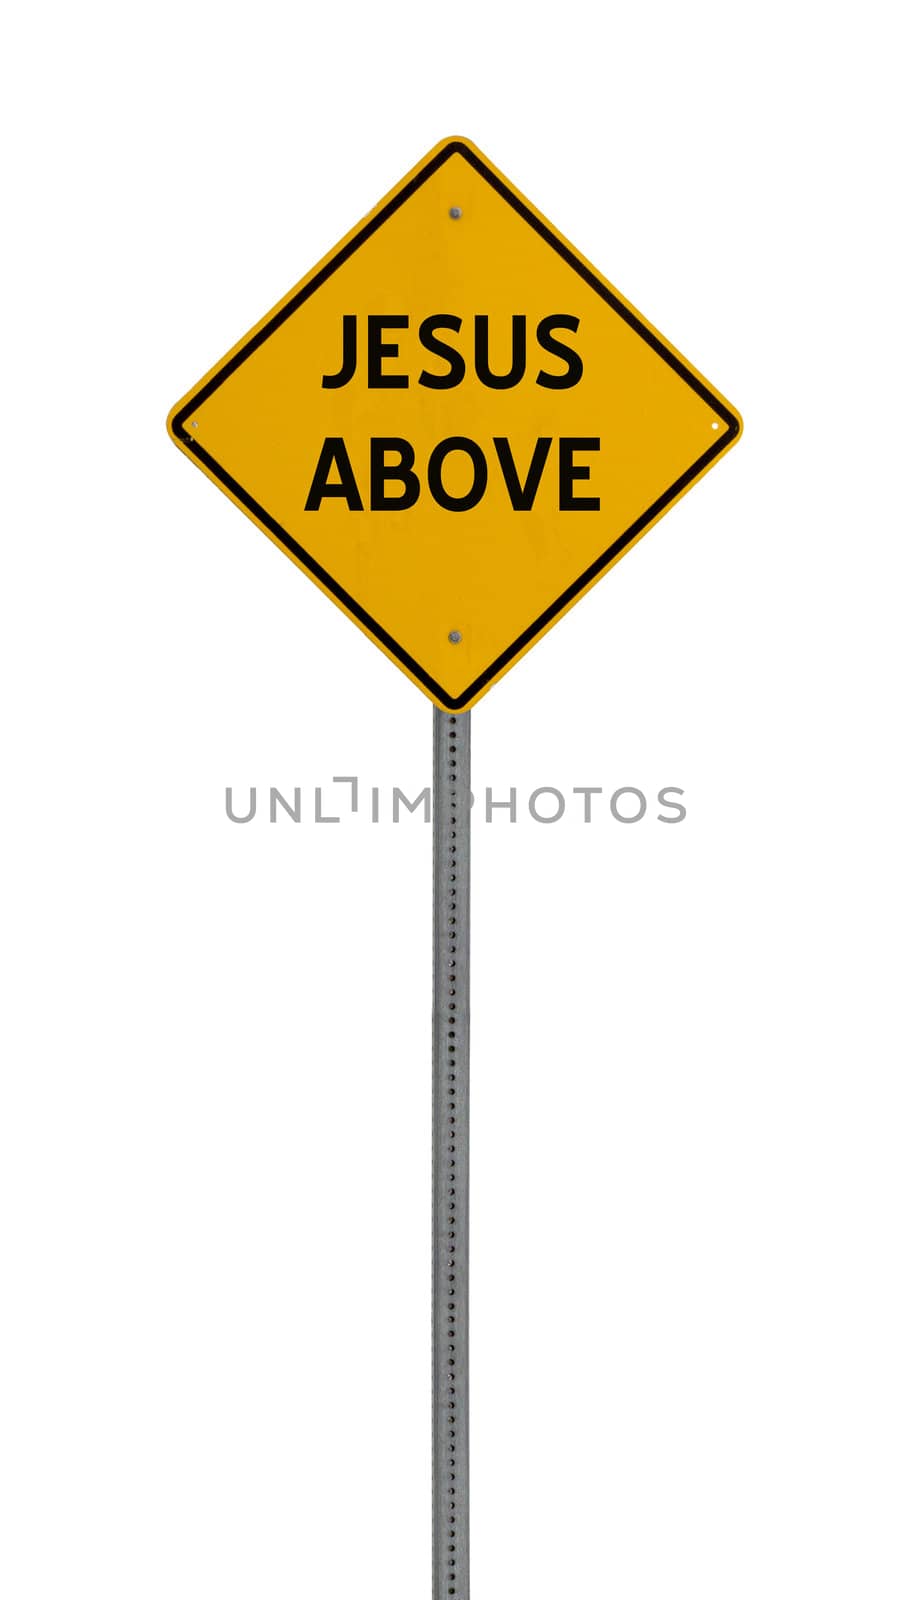 jesus above - Yellow road warning sign by jeremywhat